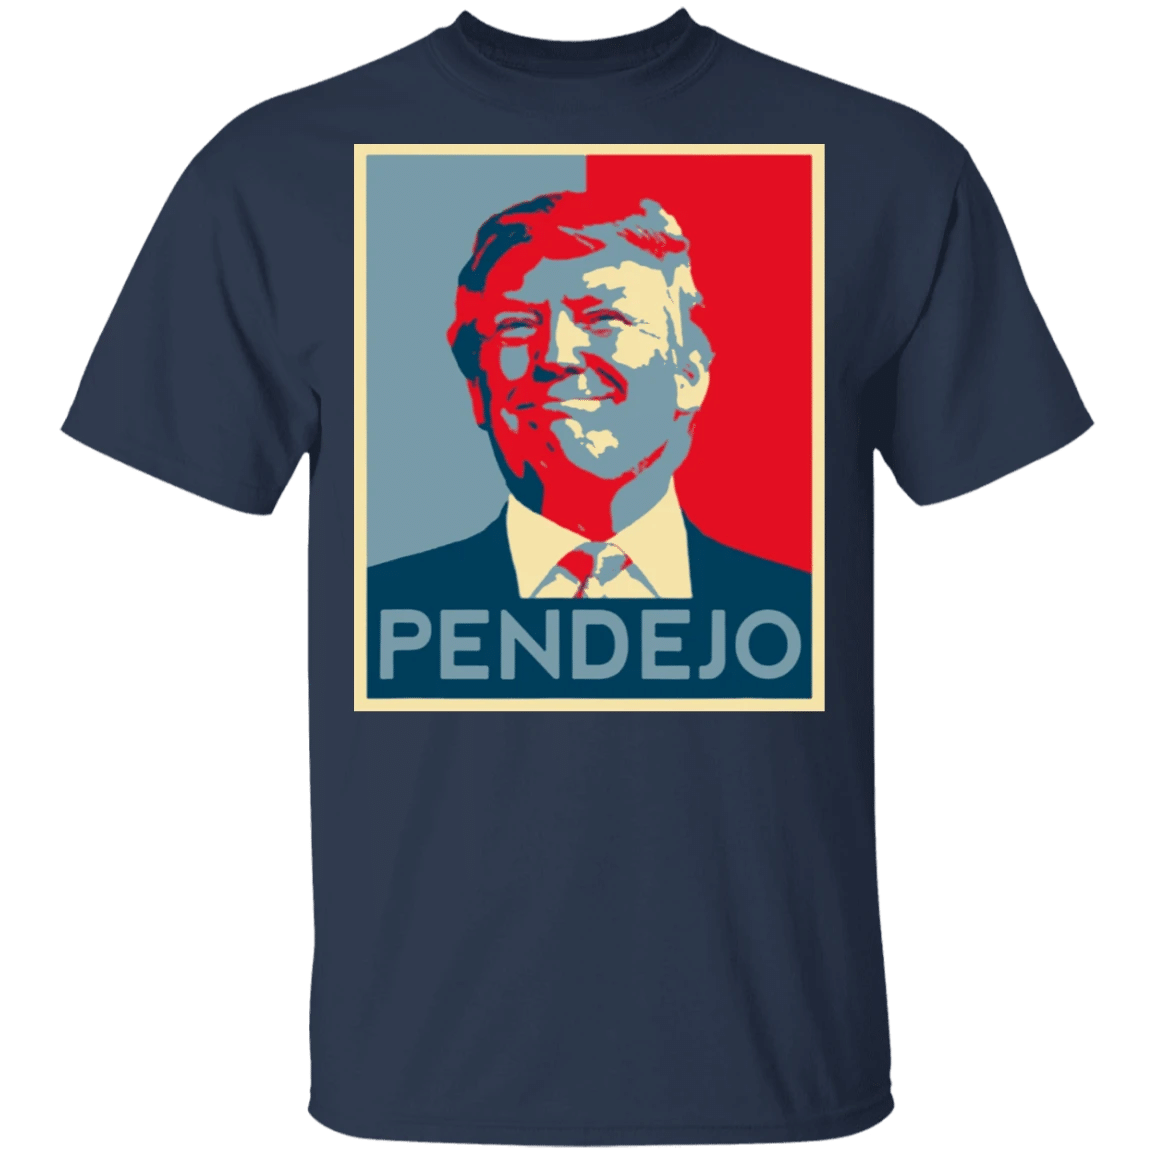 Pendejo T-Shirt Funny Graphic Tee For Anti Trump Dump Trump Shirt Gifts For Dad For Election